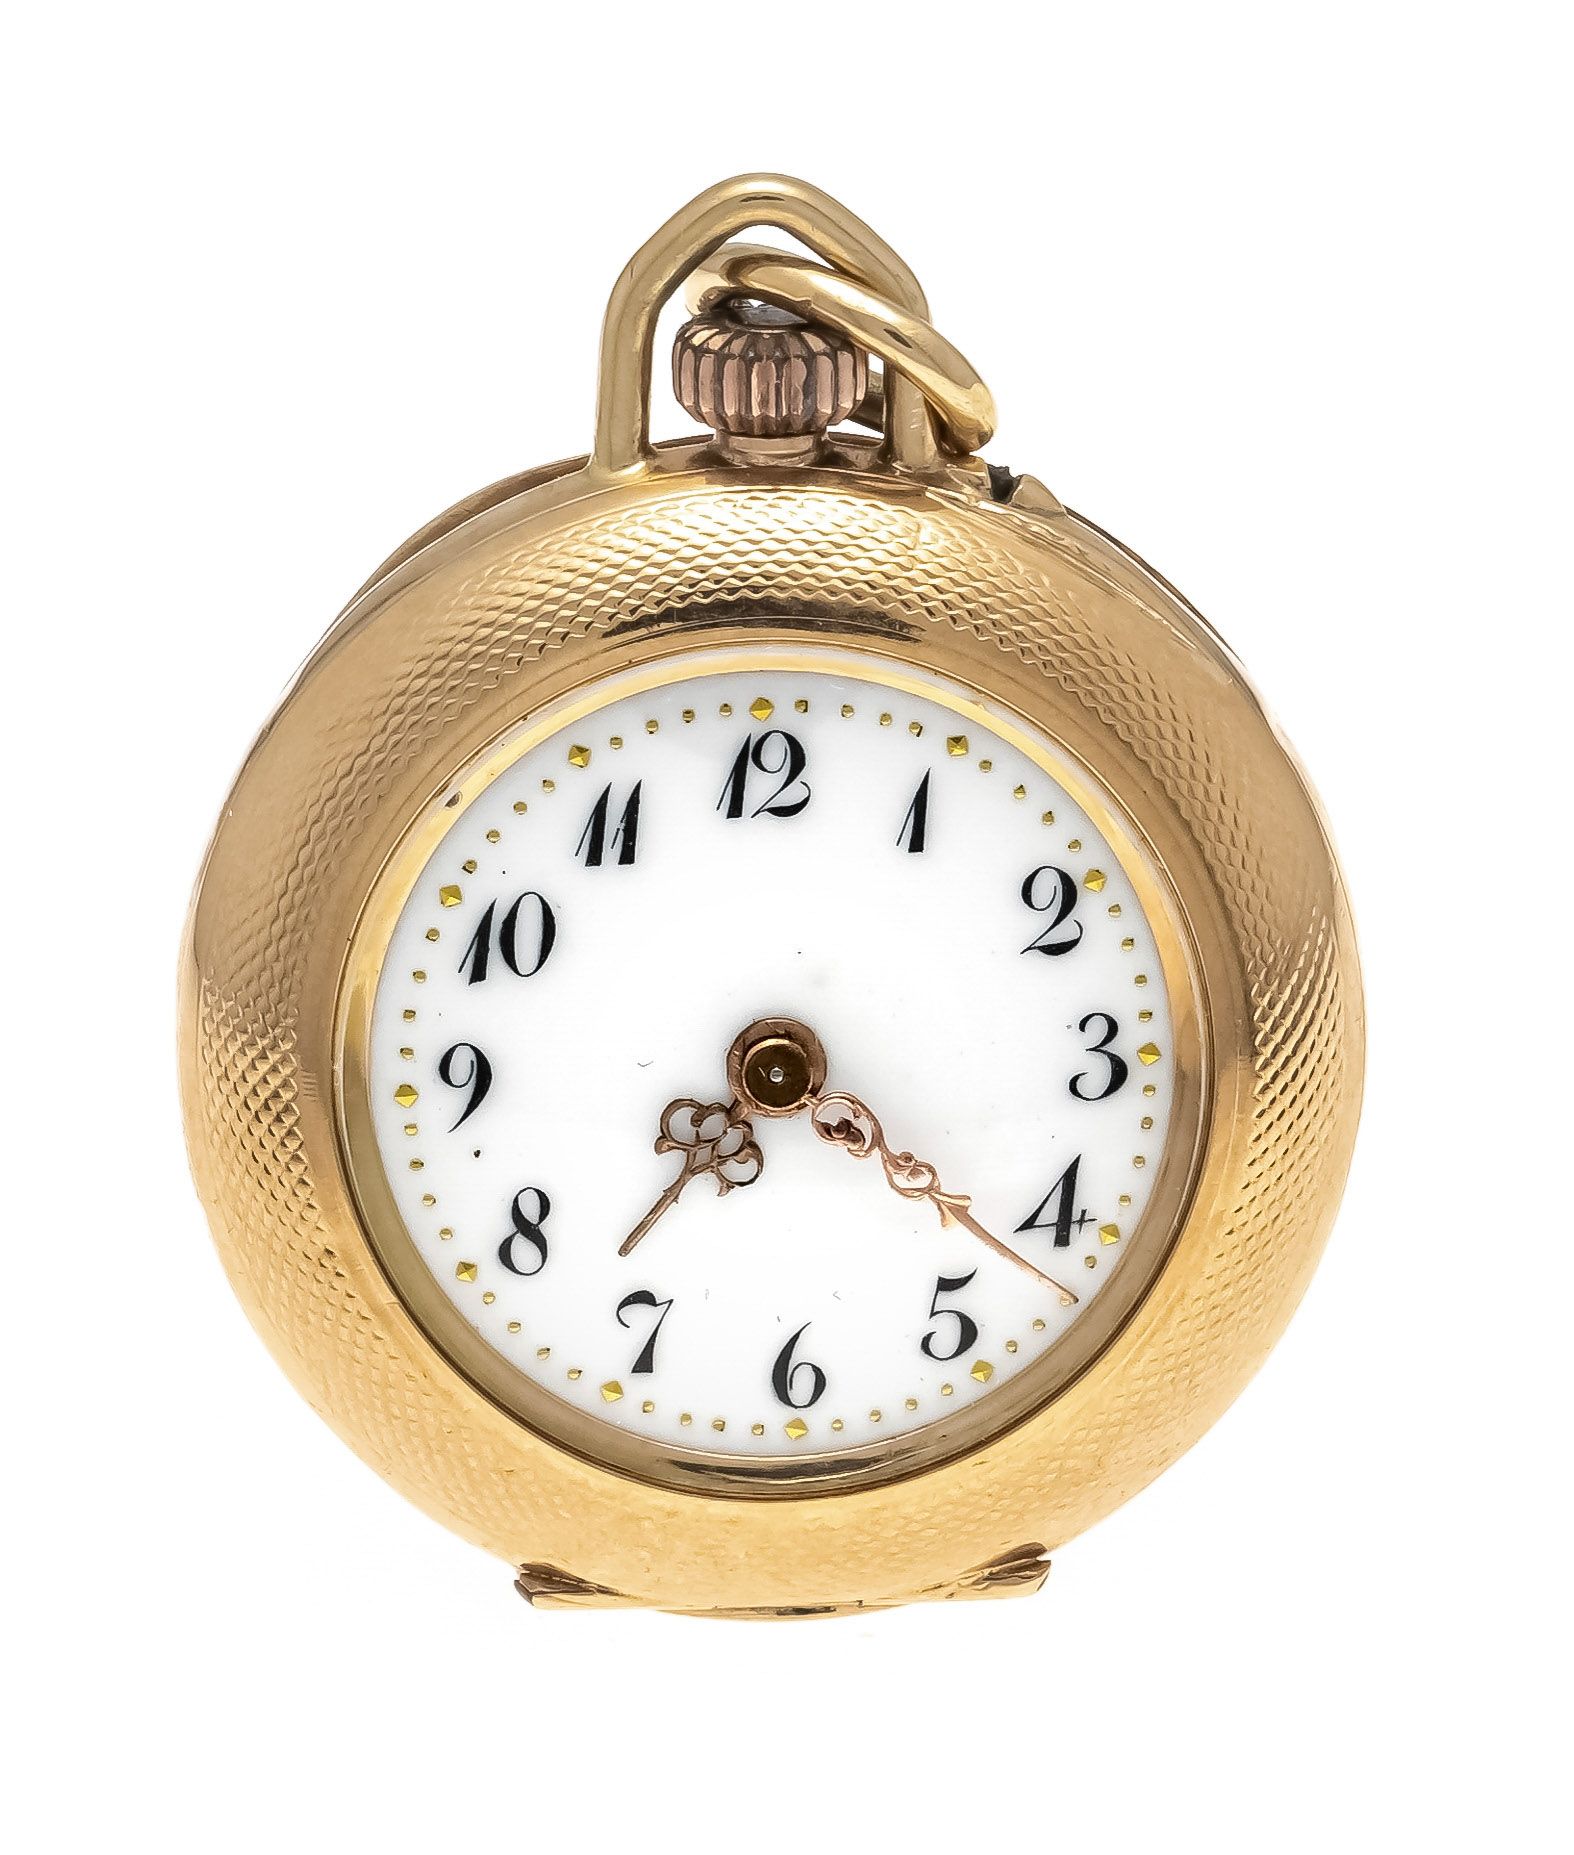 Null open ladies pocket watch, 585/000 GG, 2 lids gold, lid guilloché and back e&hellip;